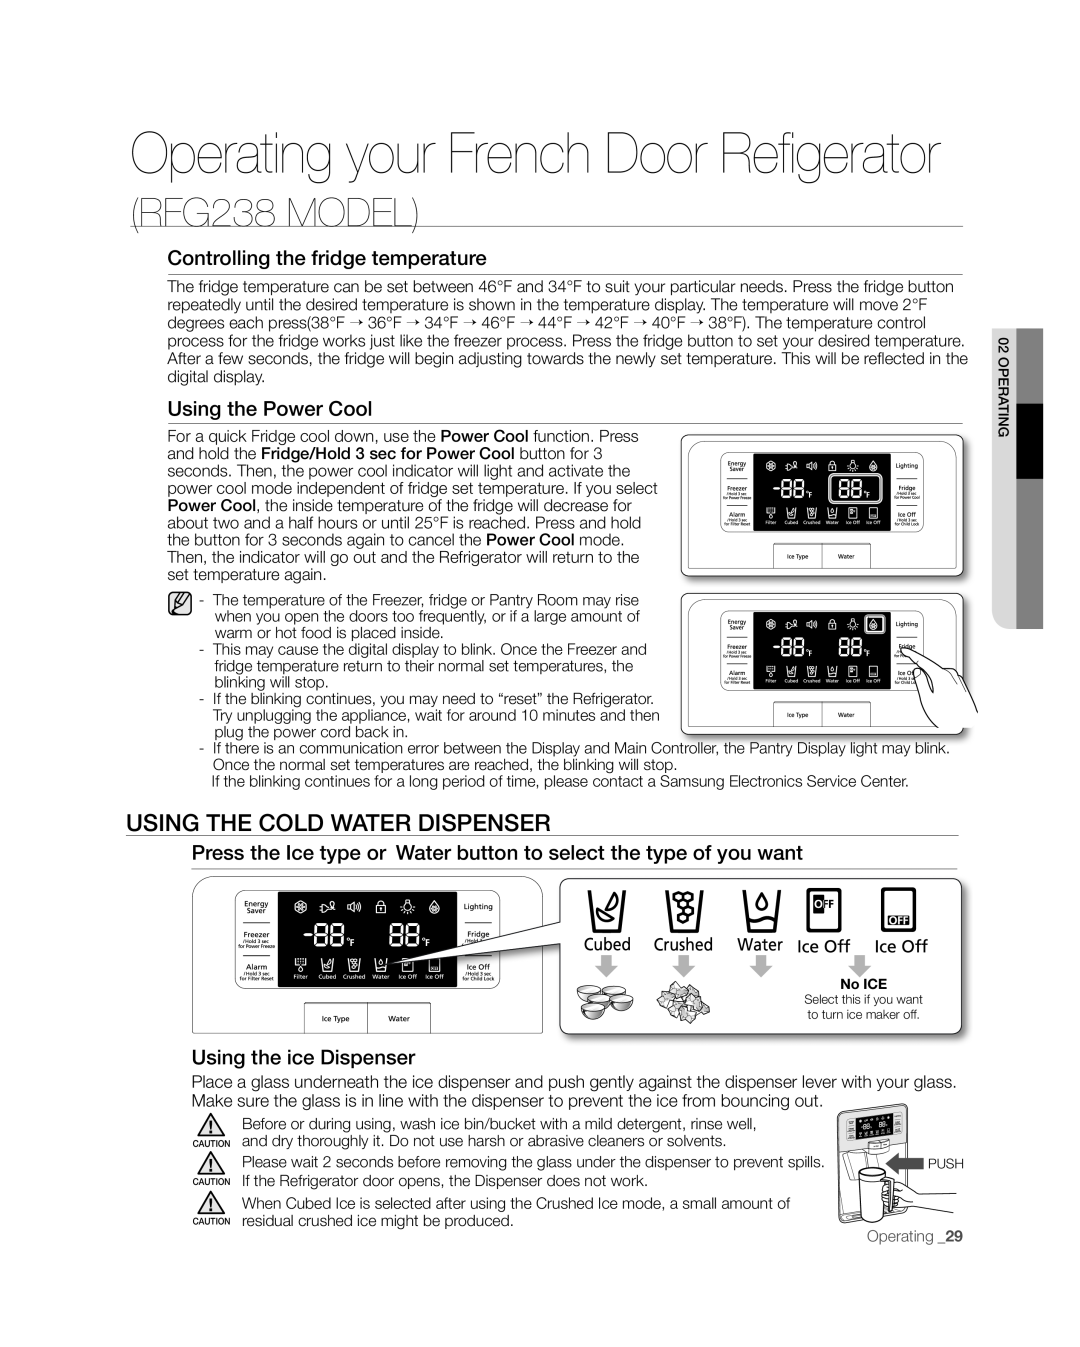 Samsung RFG237 Operating your French Door Refigerator, RFG238 MODEL, Using The Cold Water Dispenser, Using the Power Cool 